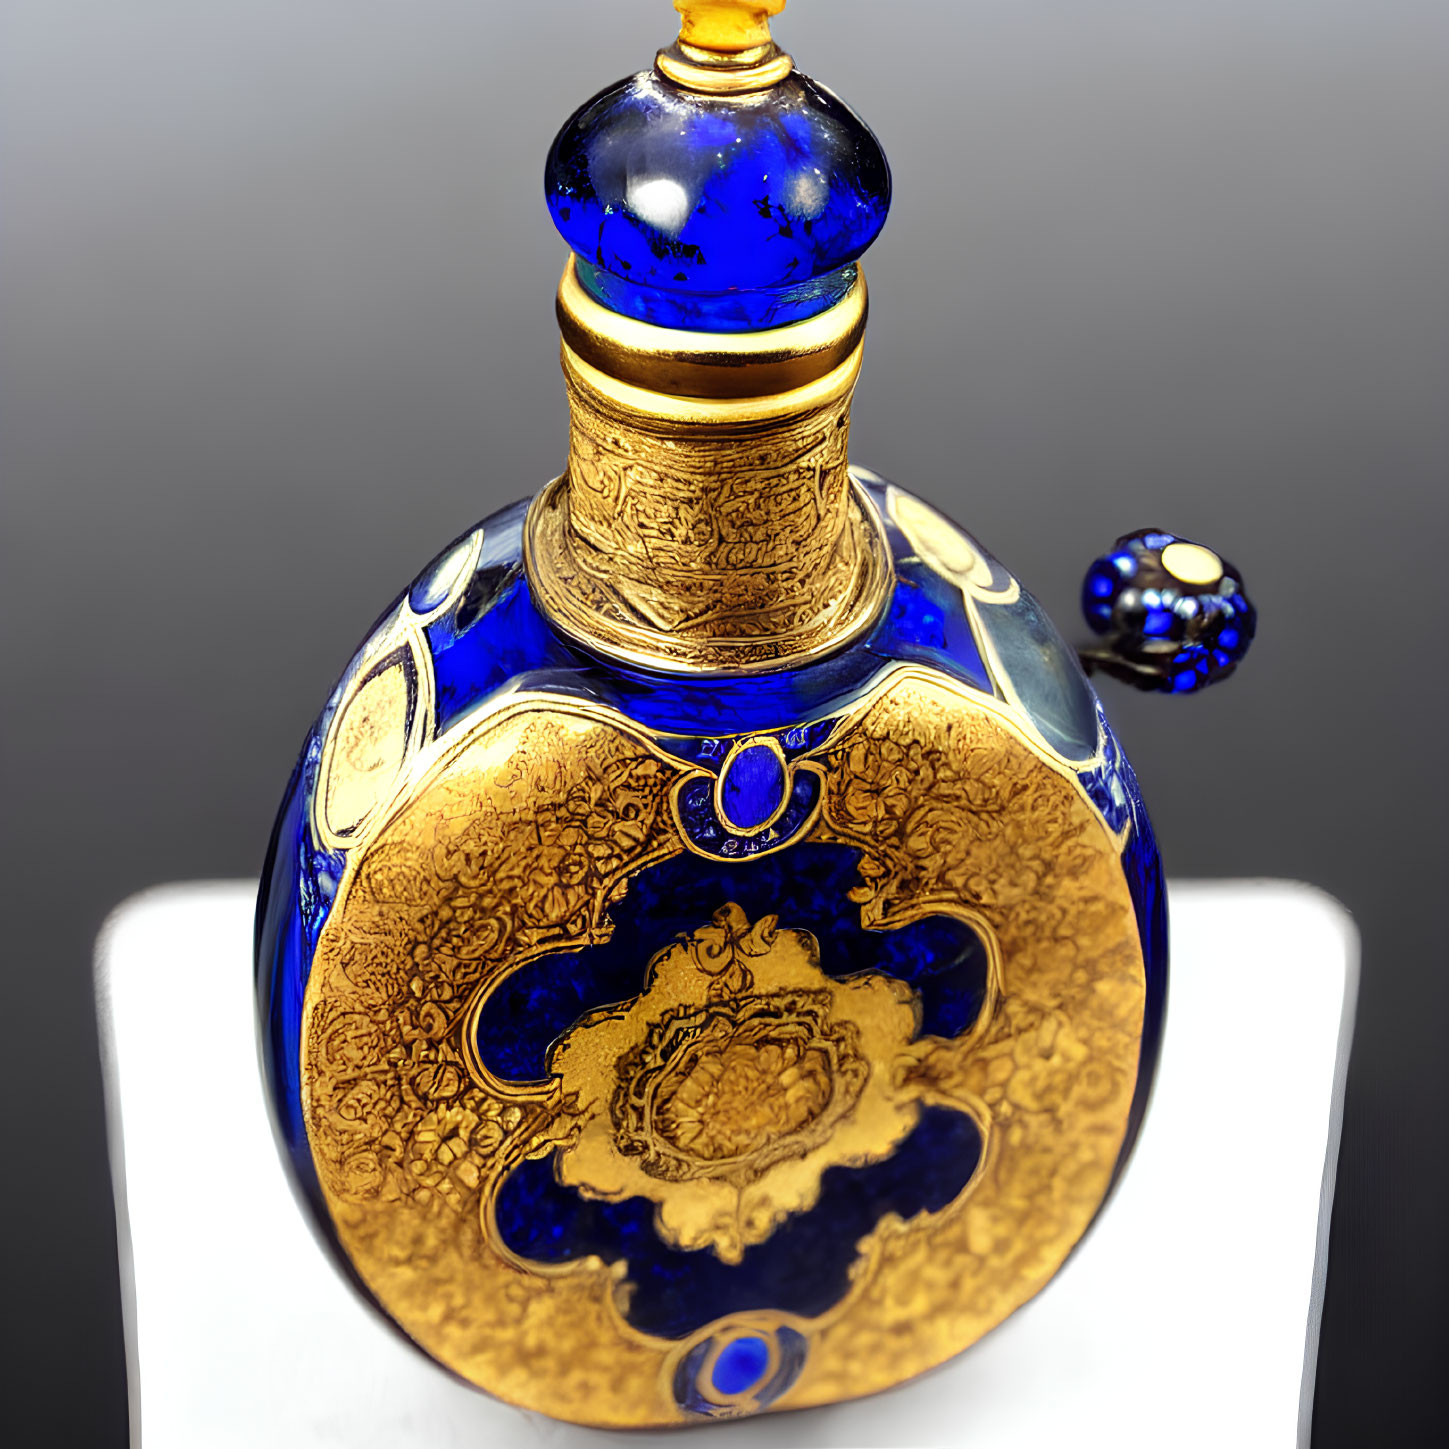 Luxurious Round Glass Perfume Bottle with Gold and Blue Details